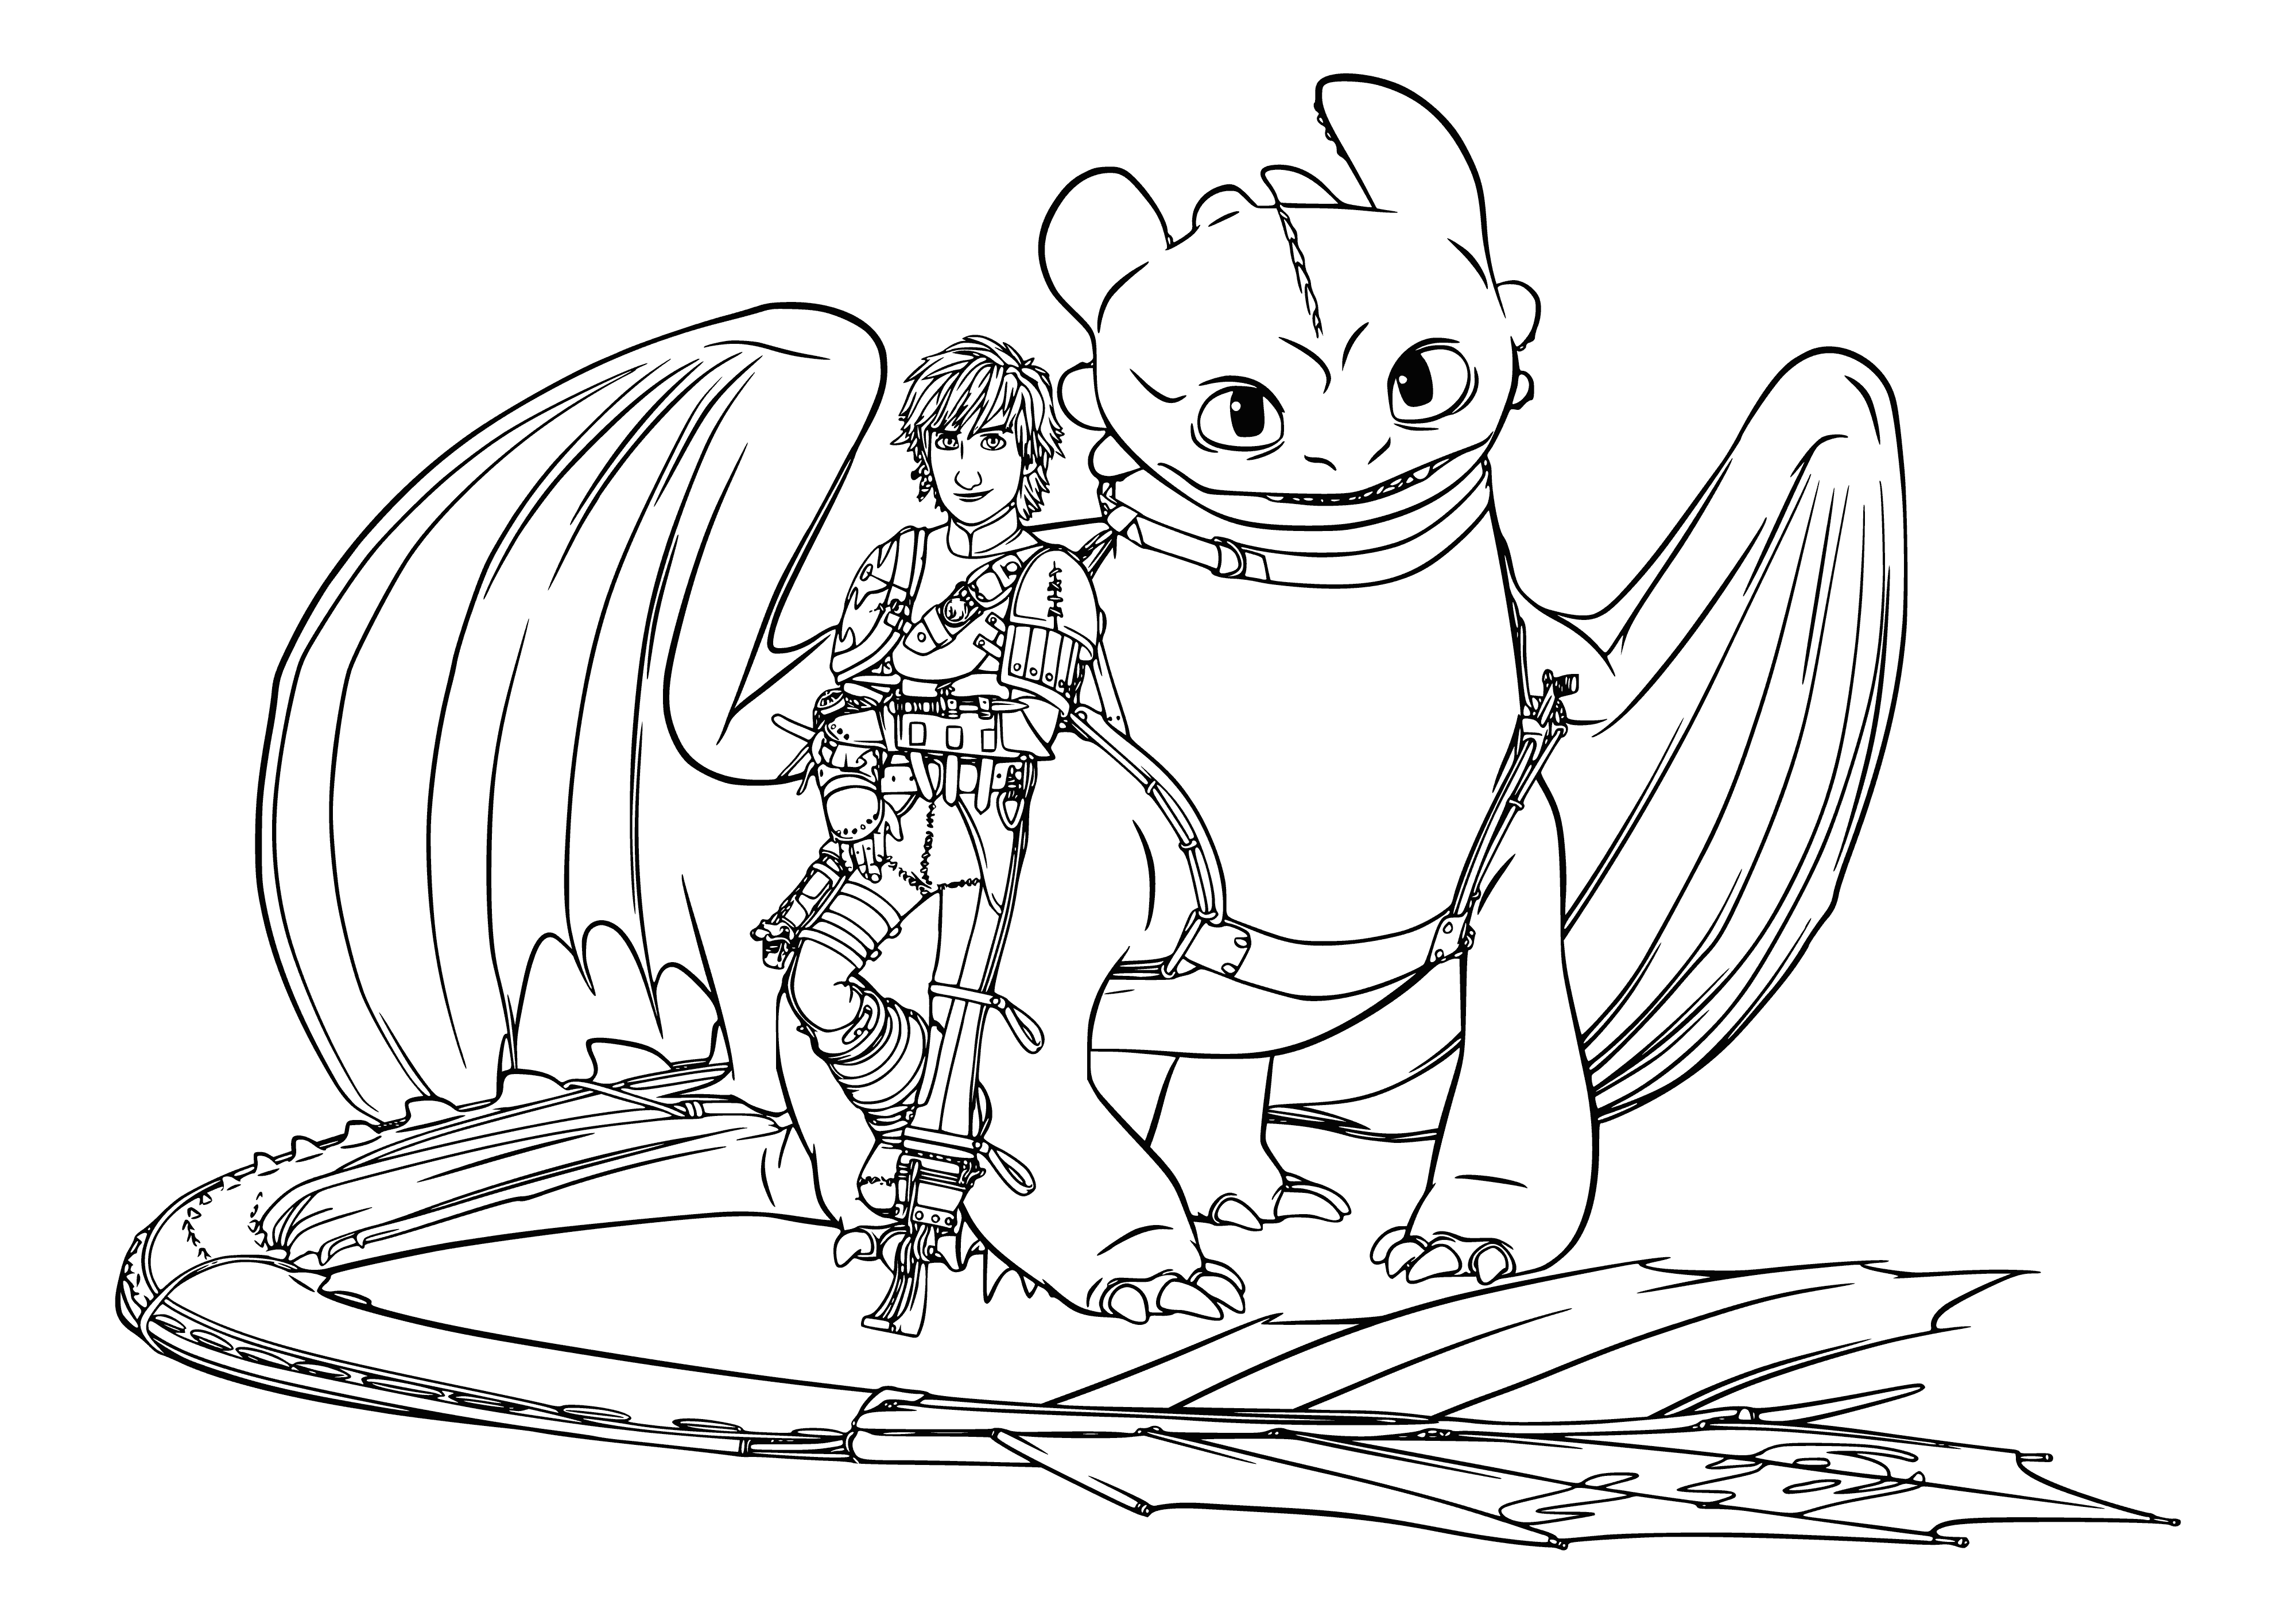 Ikking and Bezzubik coloring page